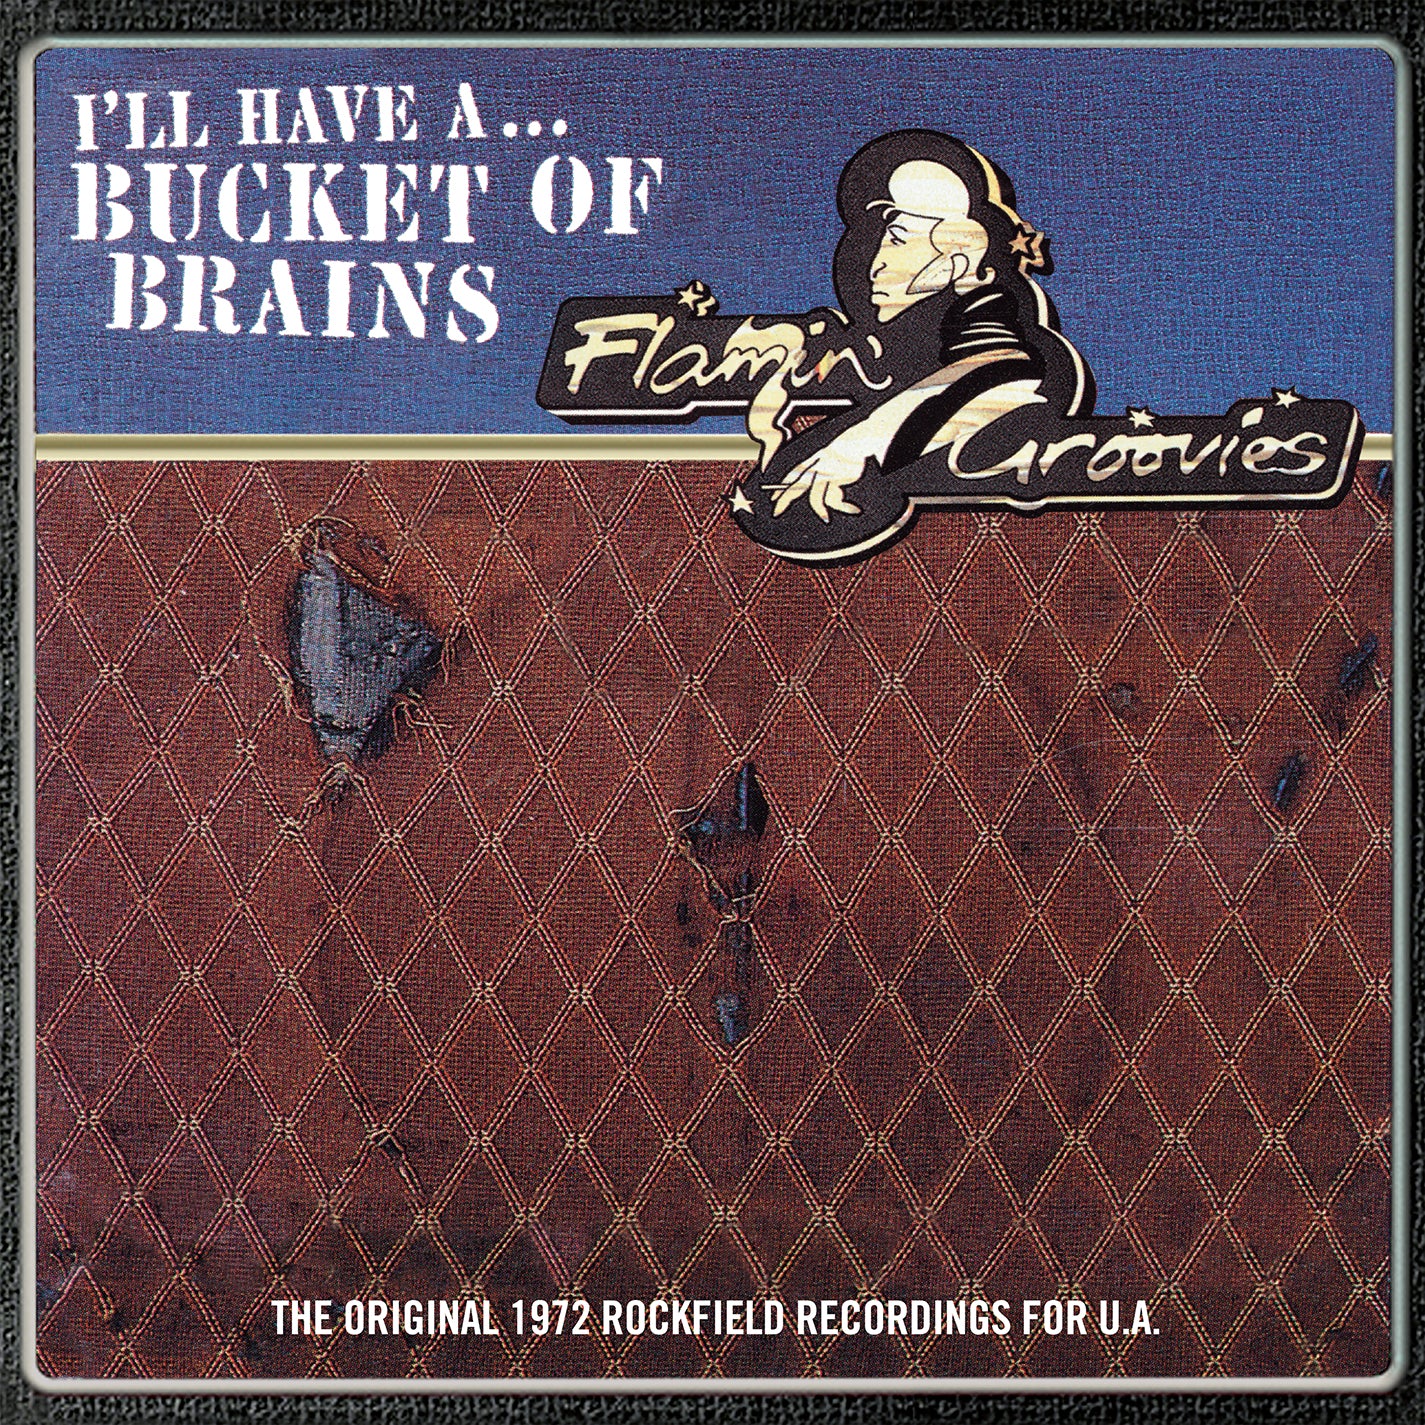 Flamin' Groovies - I'll Have A Bucket of Brains RSD (Vinyl 10" EP)